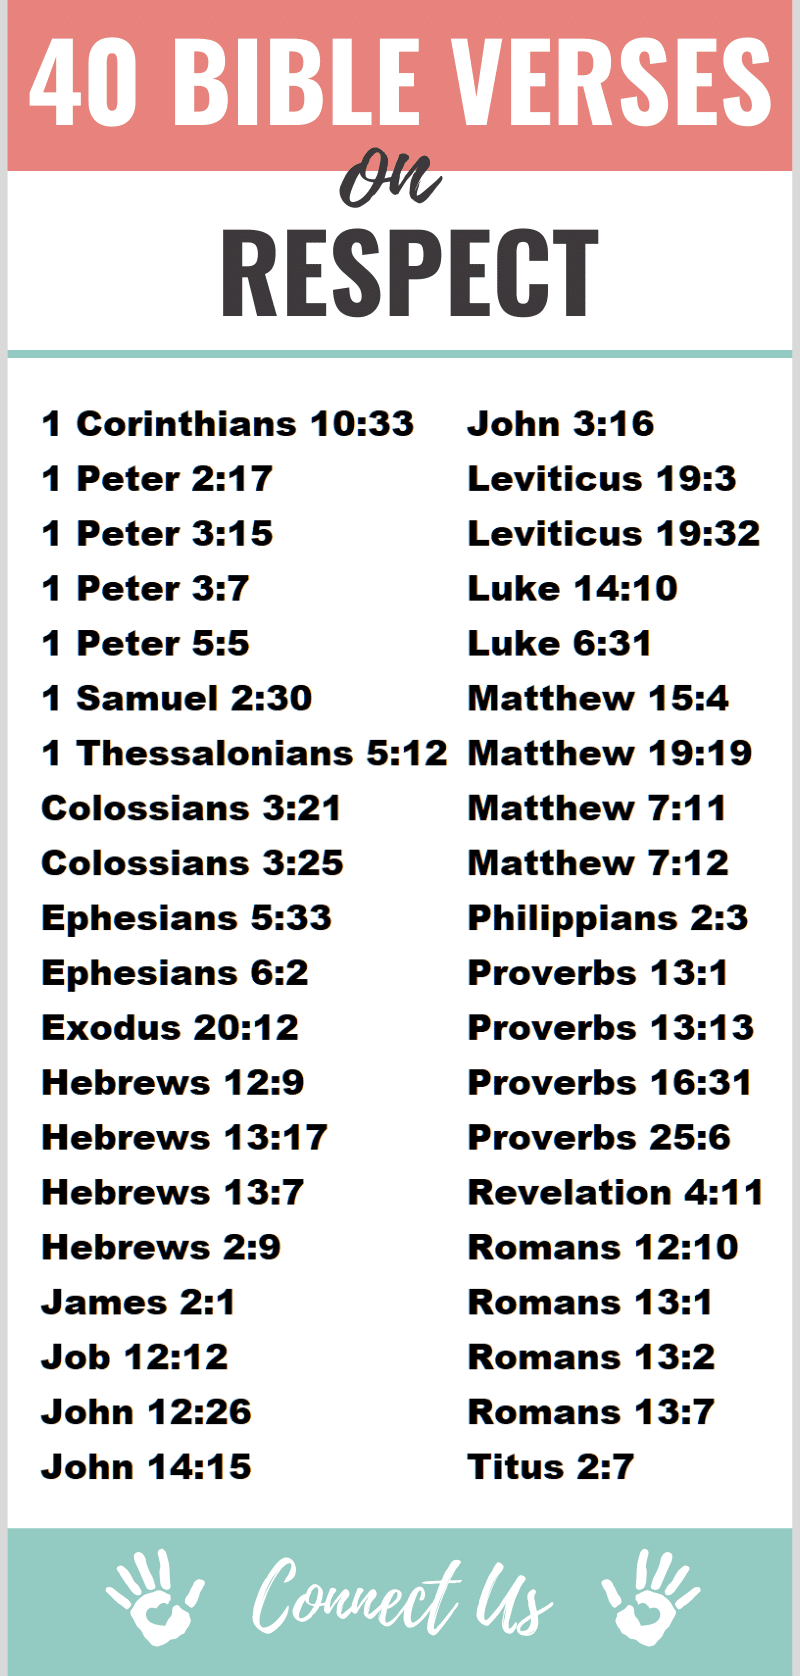 Bible Verses on Respect